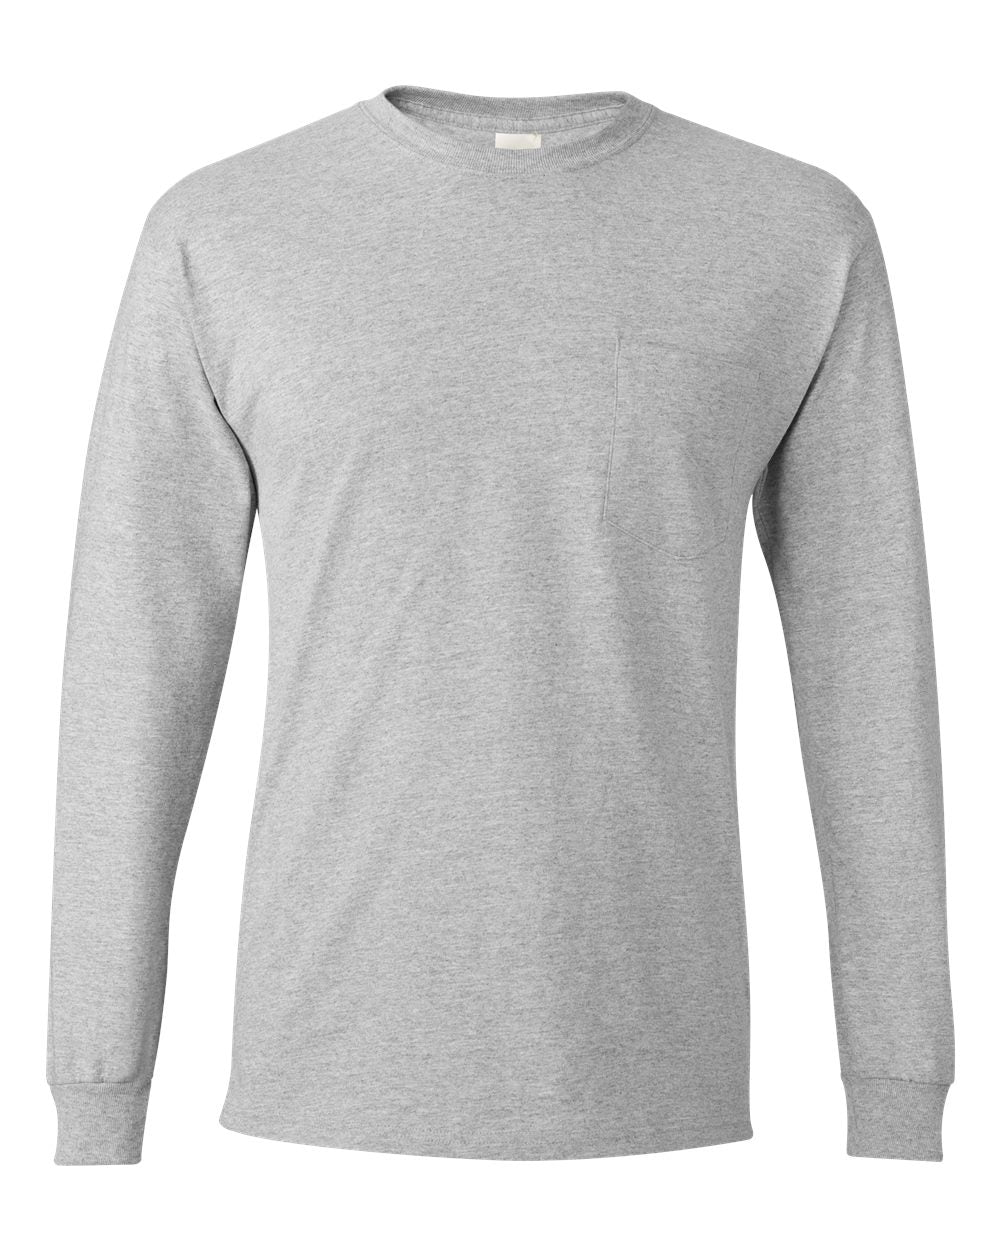 (UVF ONLY) Long Sleeve POCKET